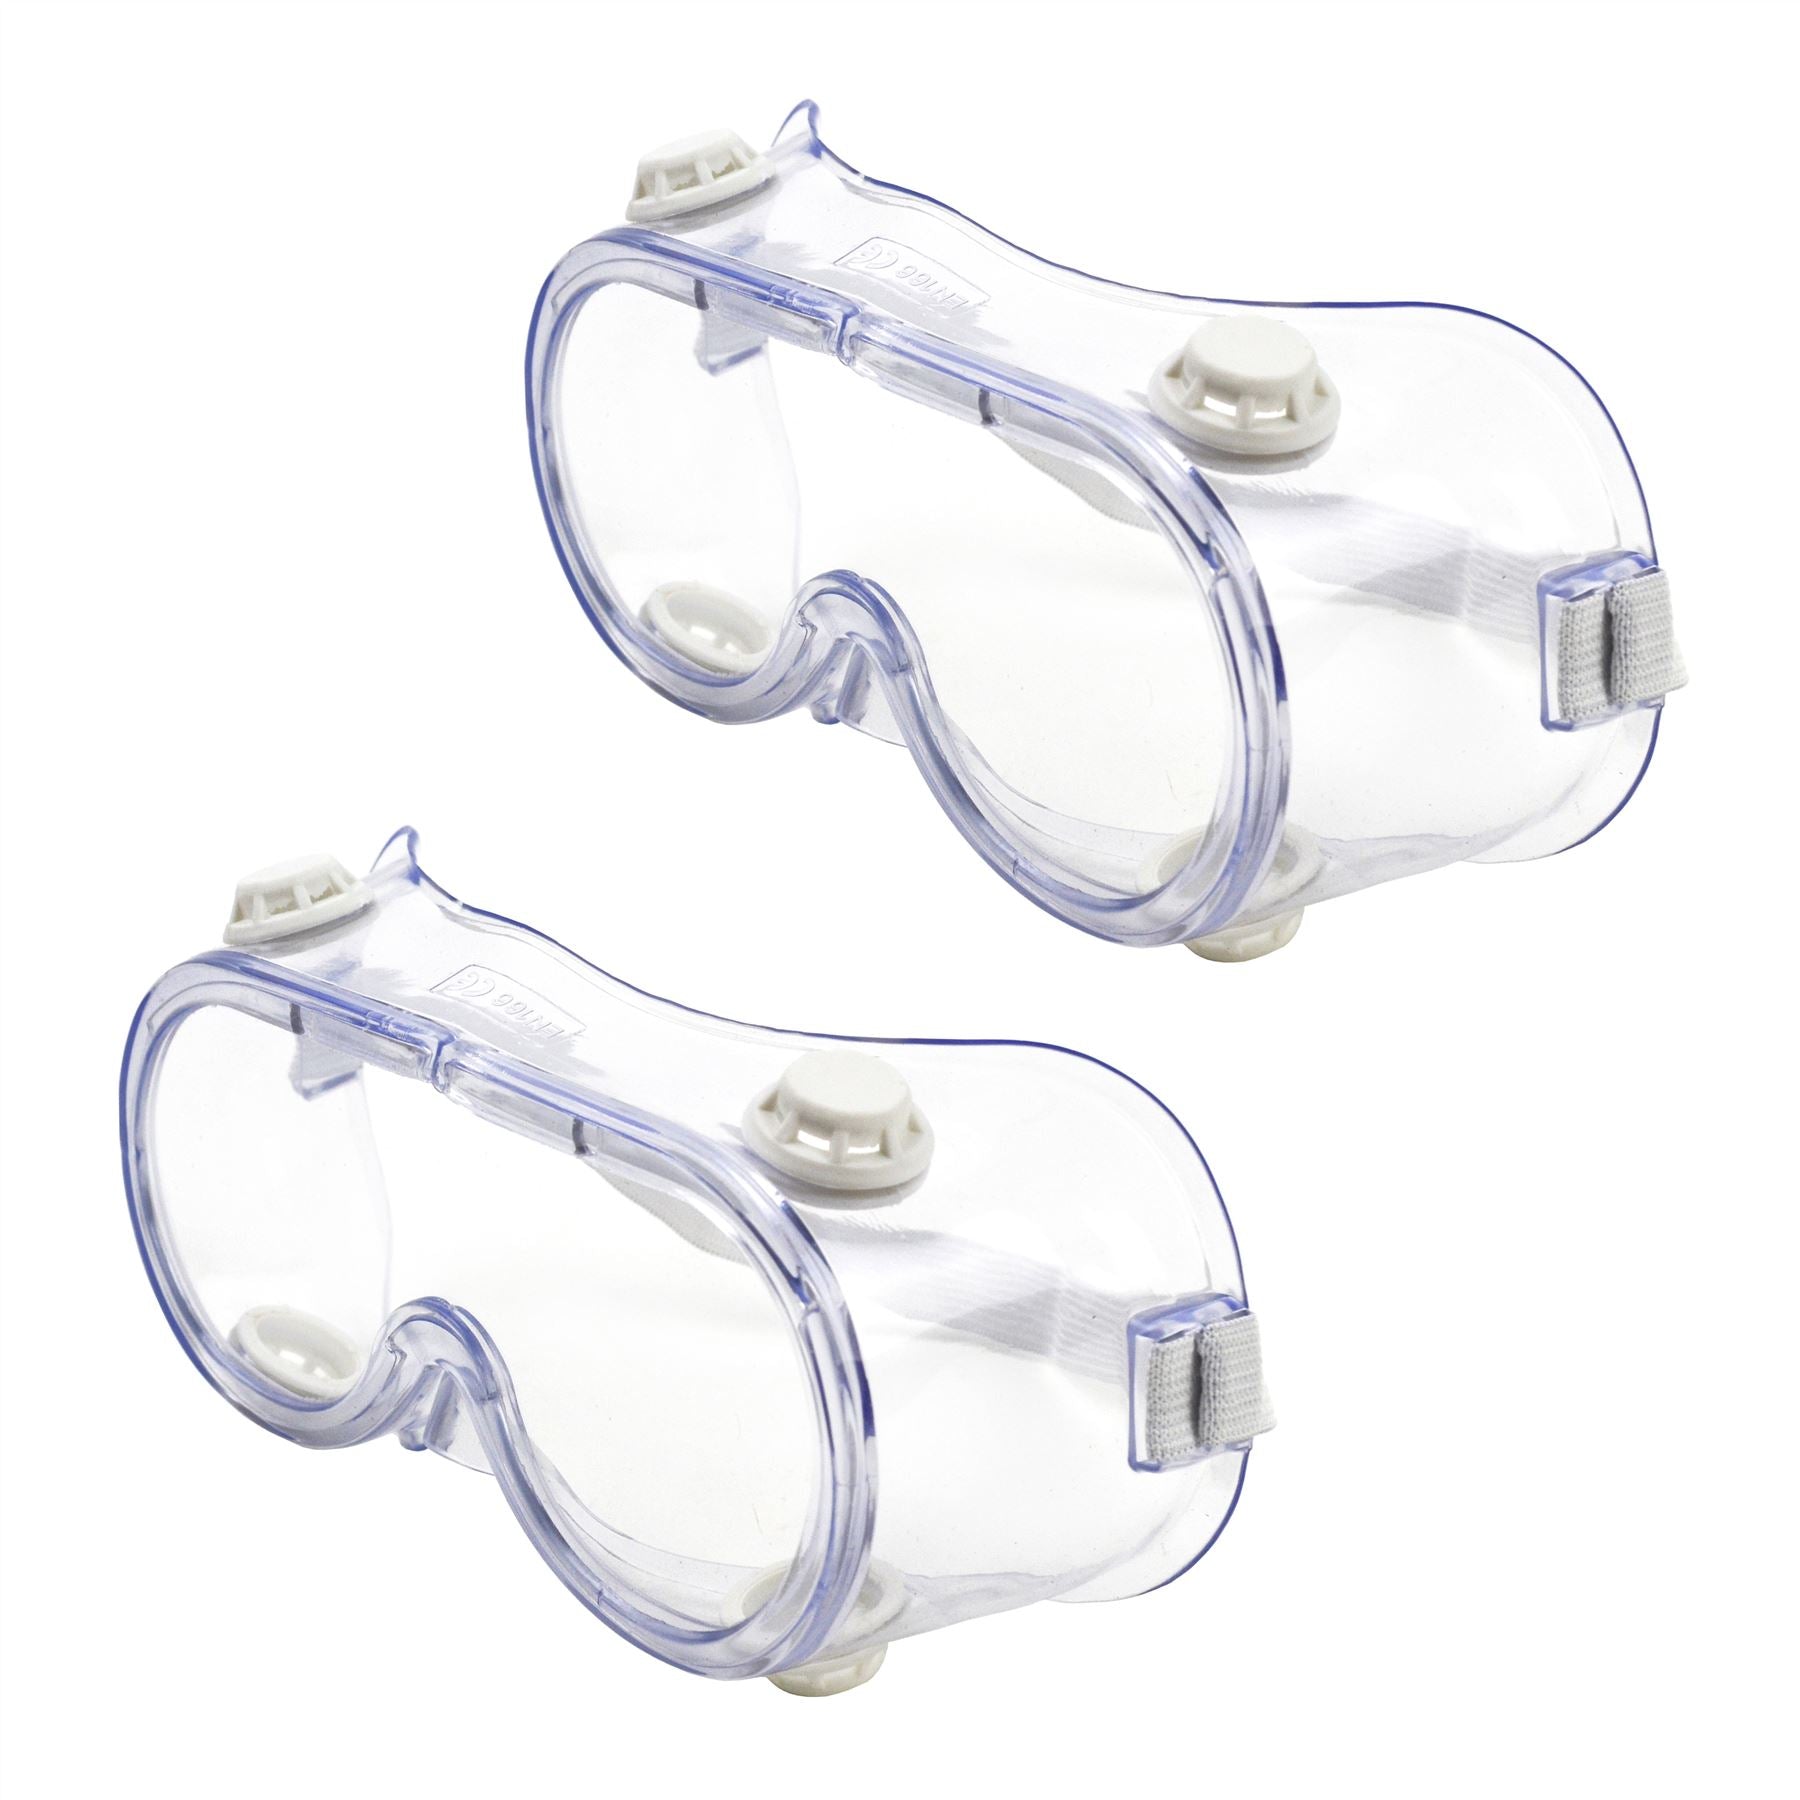 Safety Glasses / Goggles / DIY Eye Protection Industrial 2 Goggles (Pair) TE202